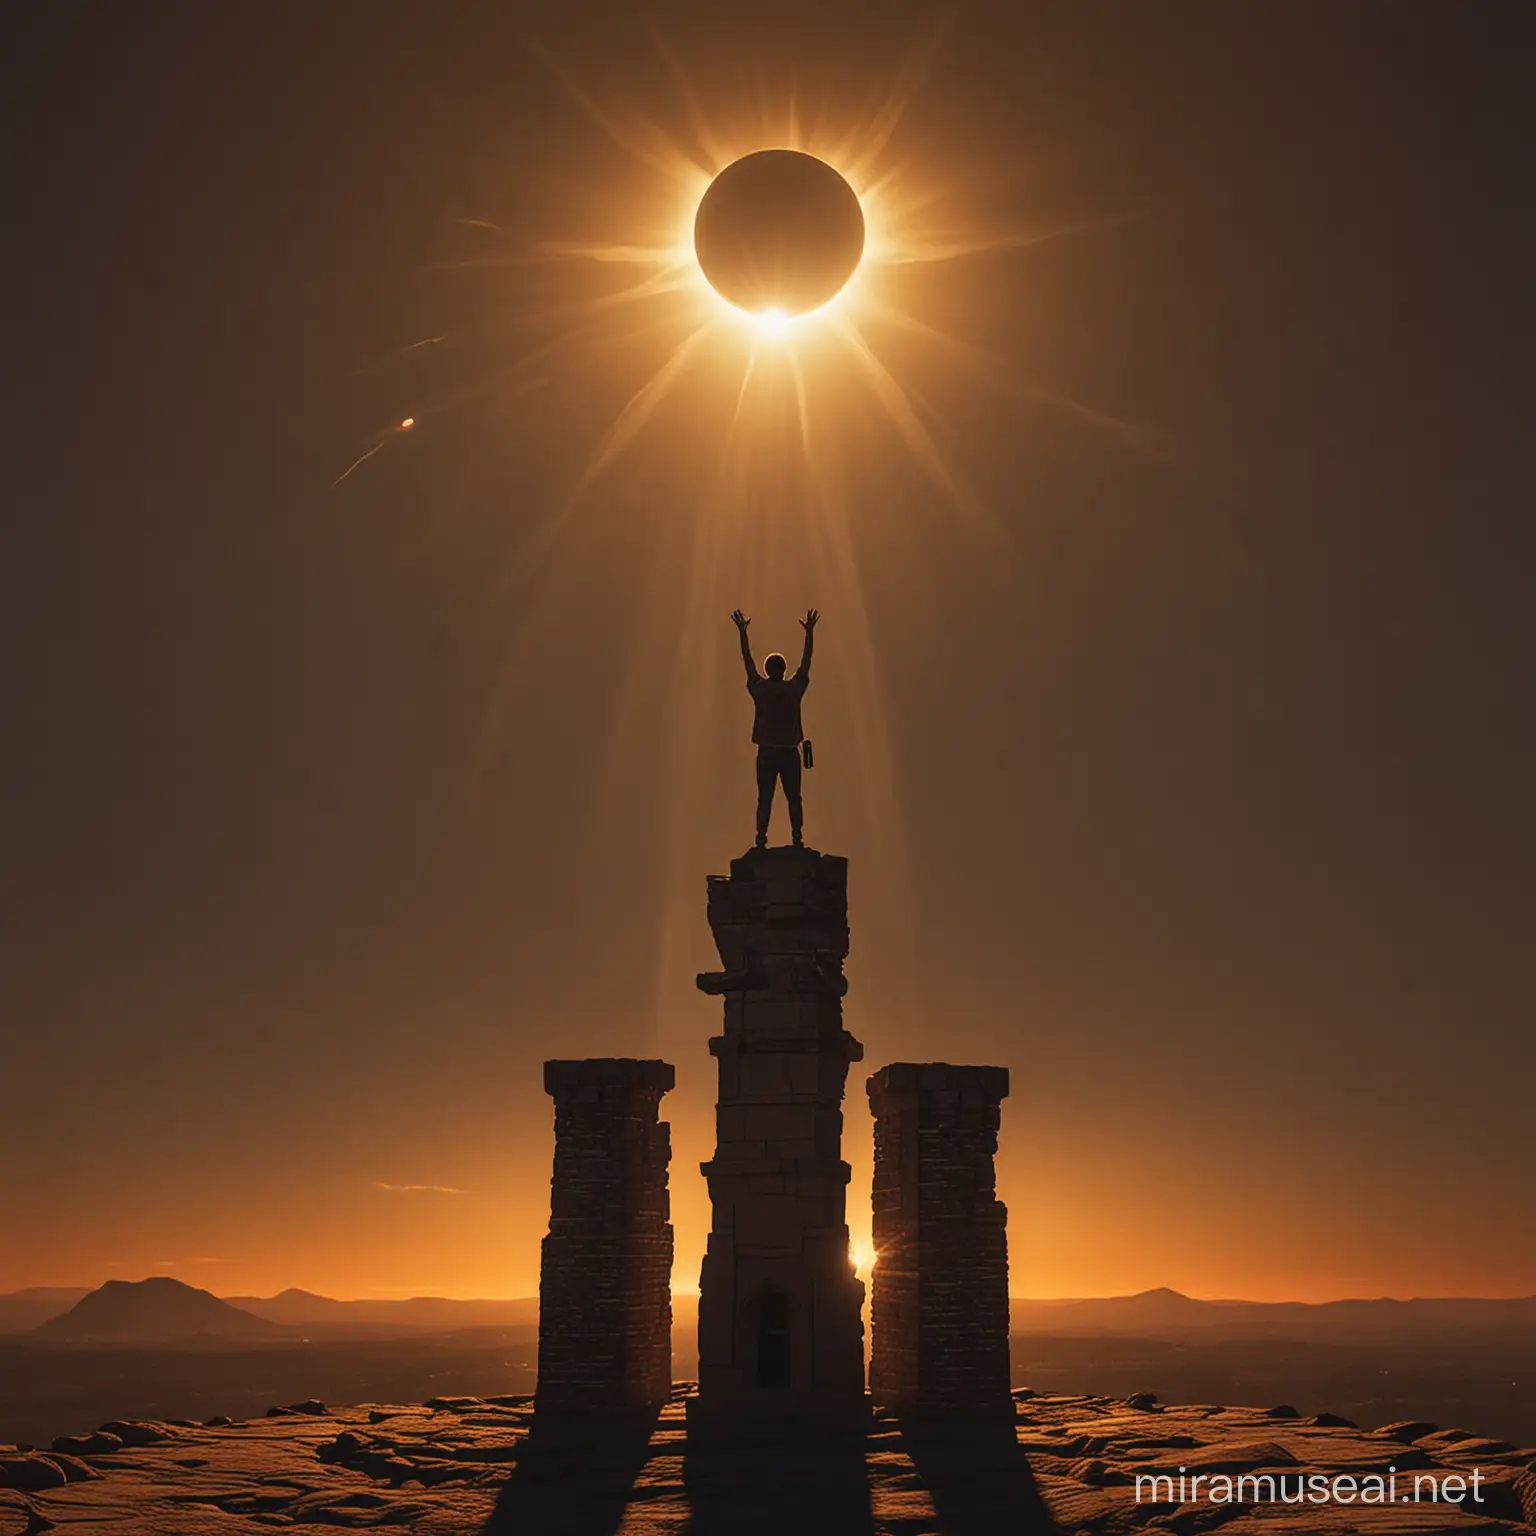 Man Standing on Tower Under Total Solar Eclipse